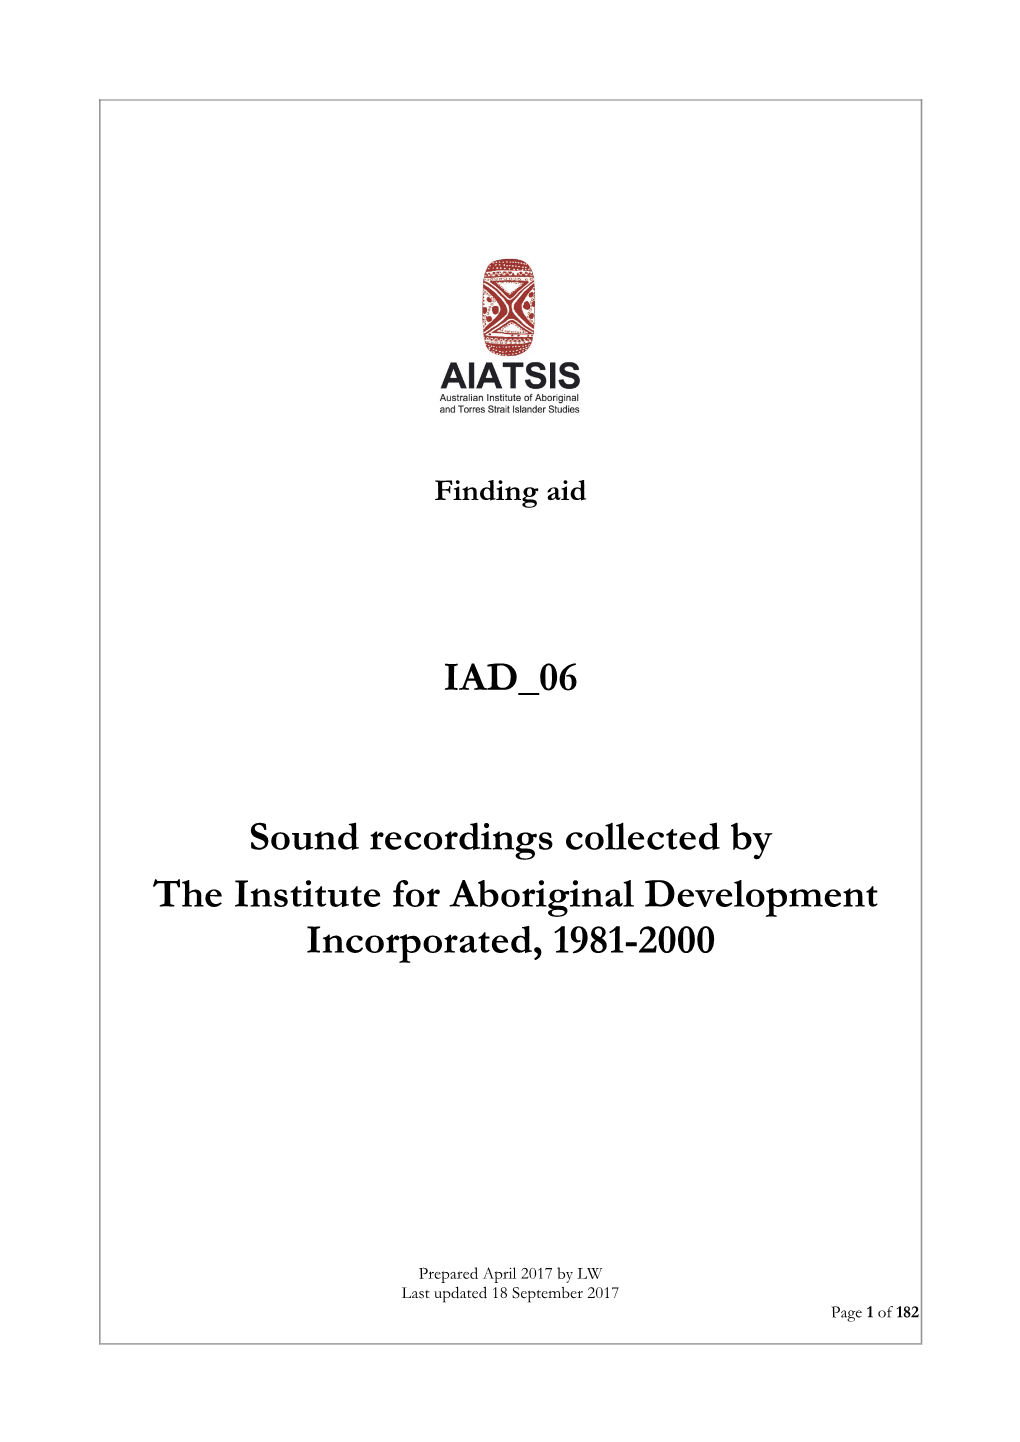 Guide to Sound Recordings Collected by the Institute for Aboriginal